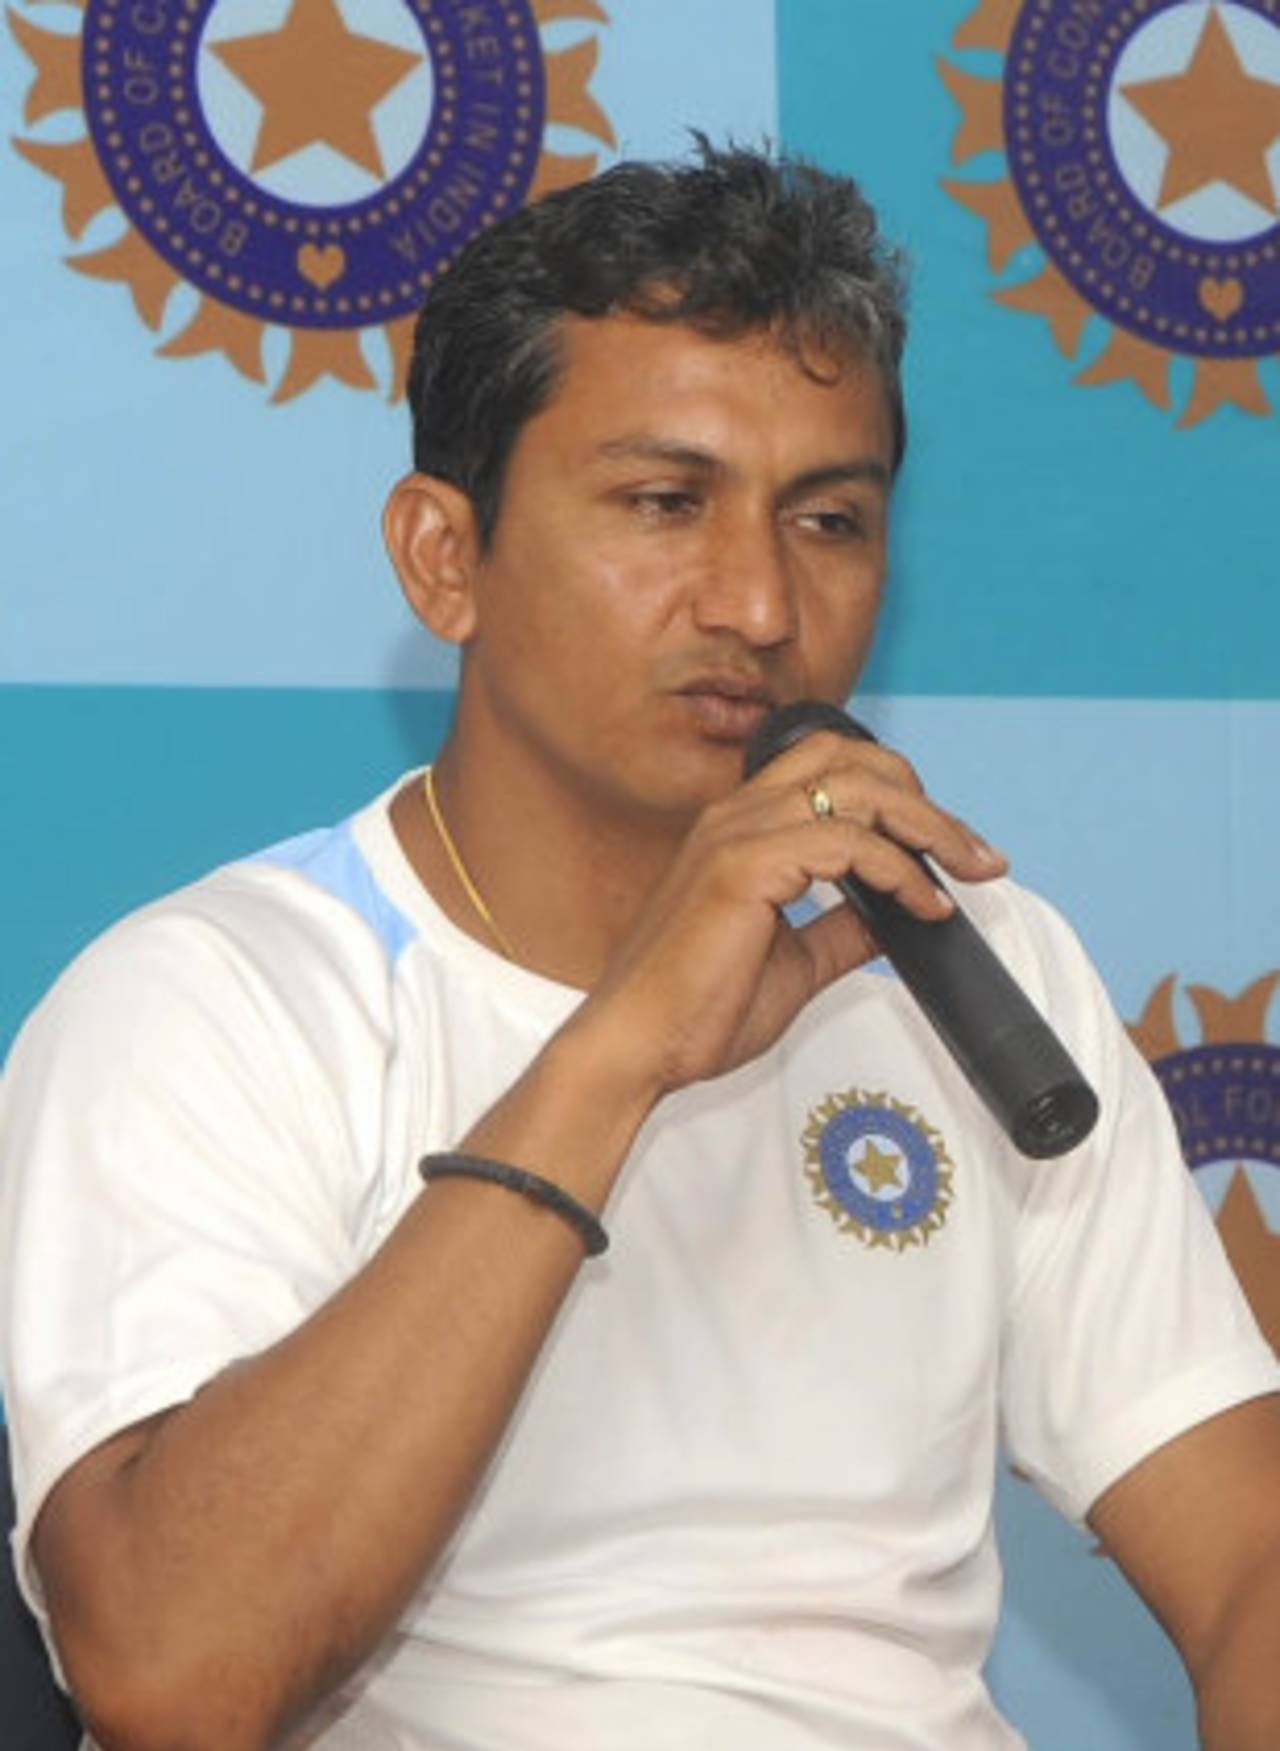 Sanjay Bangar on being India assistant coach: "It is again about trying build relationships, trying to earn respect, trying to earn the trust of the people you work with."&nbsp;&nbsp;&bull;&nbsp;&nbsp;BCCI